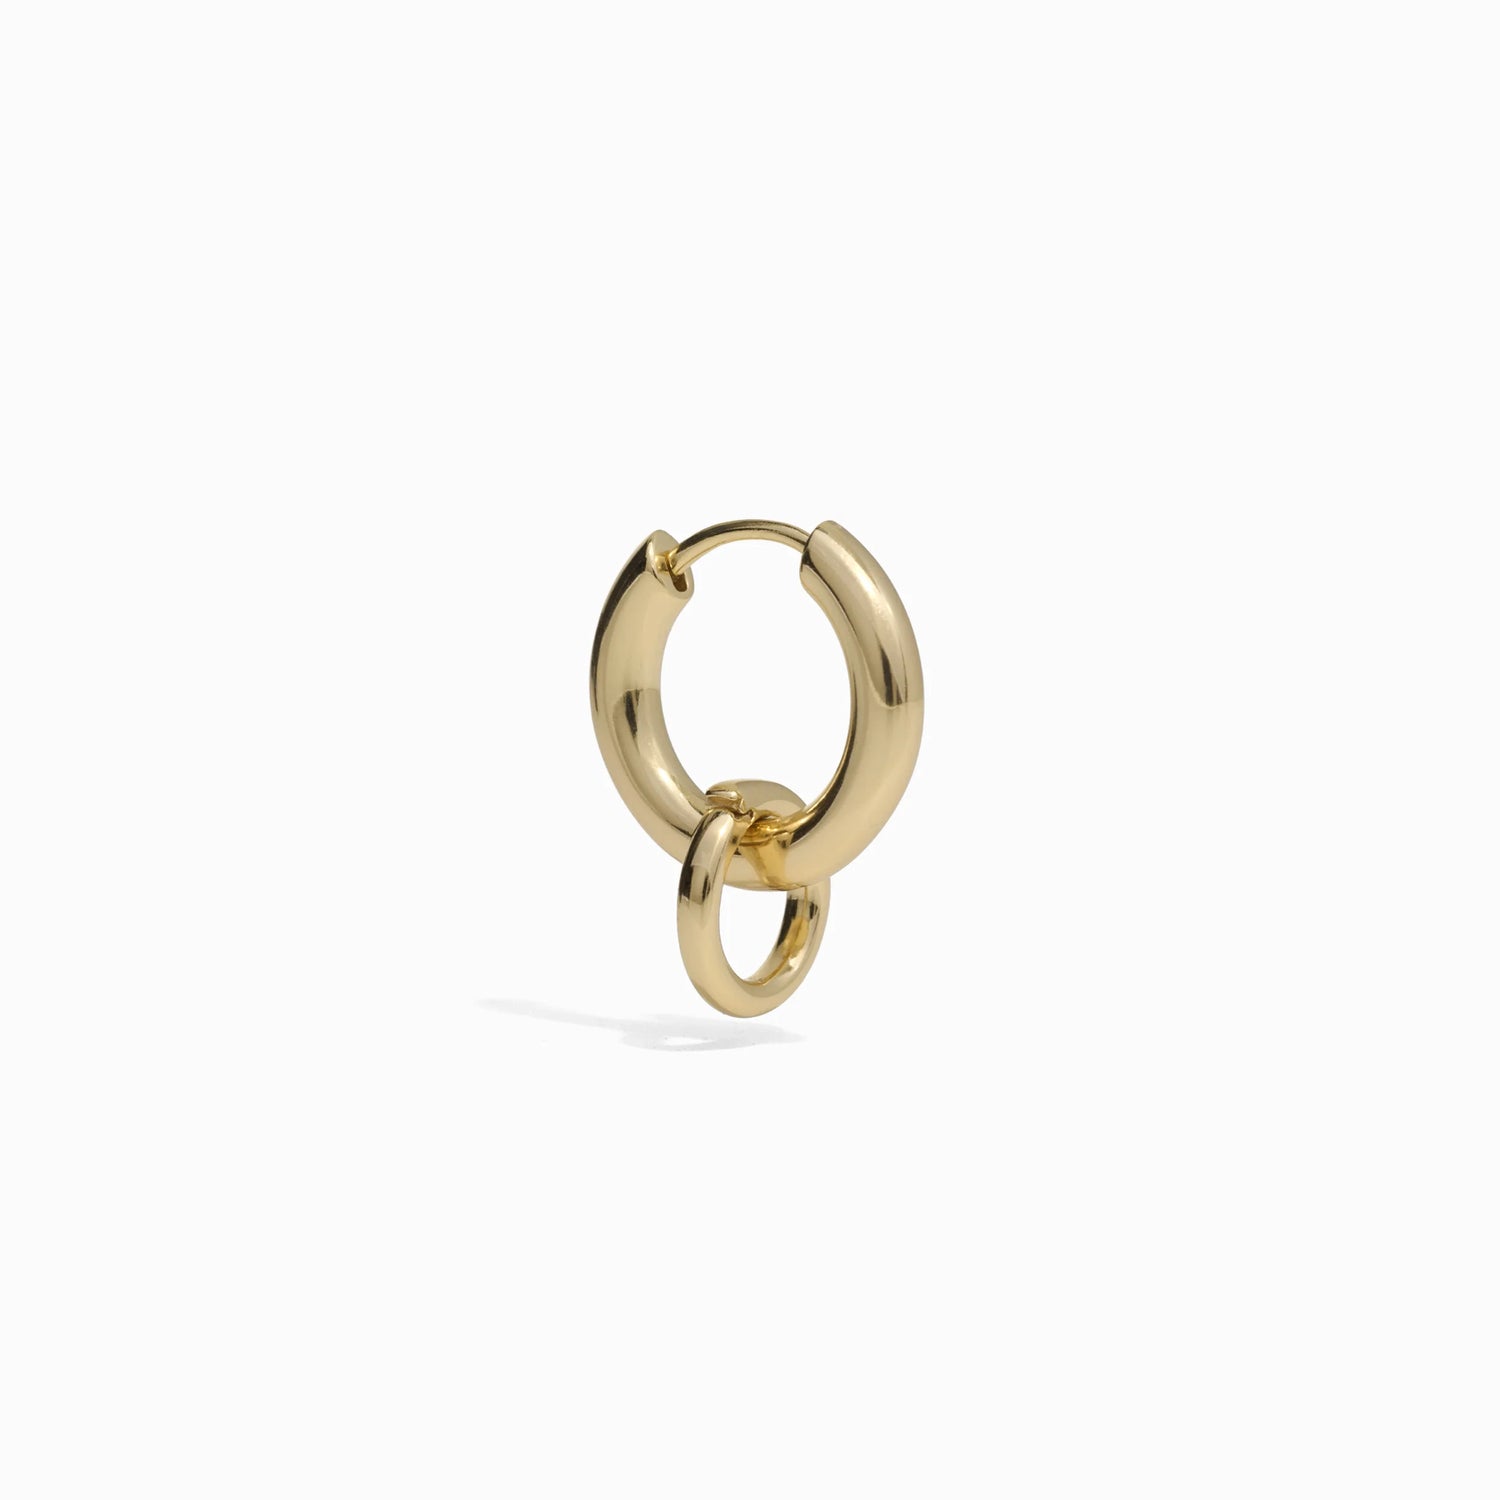 Product image of Single of The Collector Earring in gold vermeil